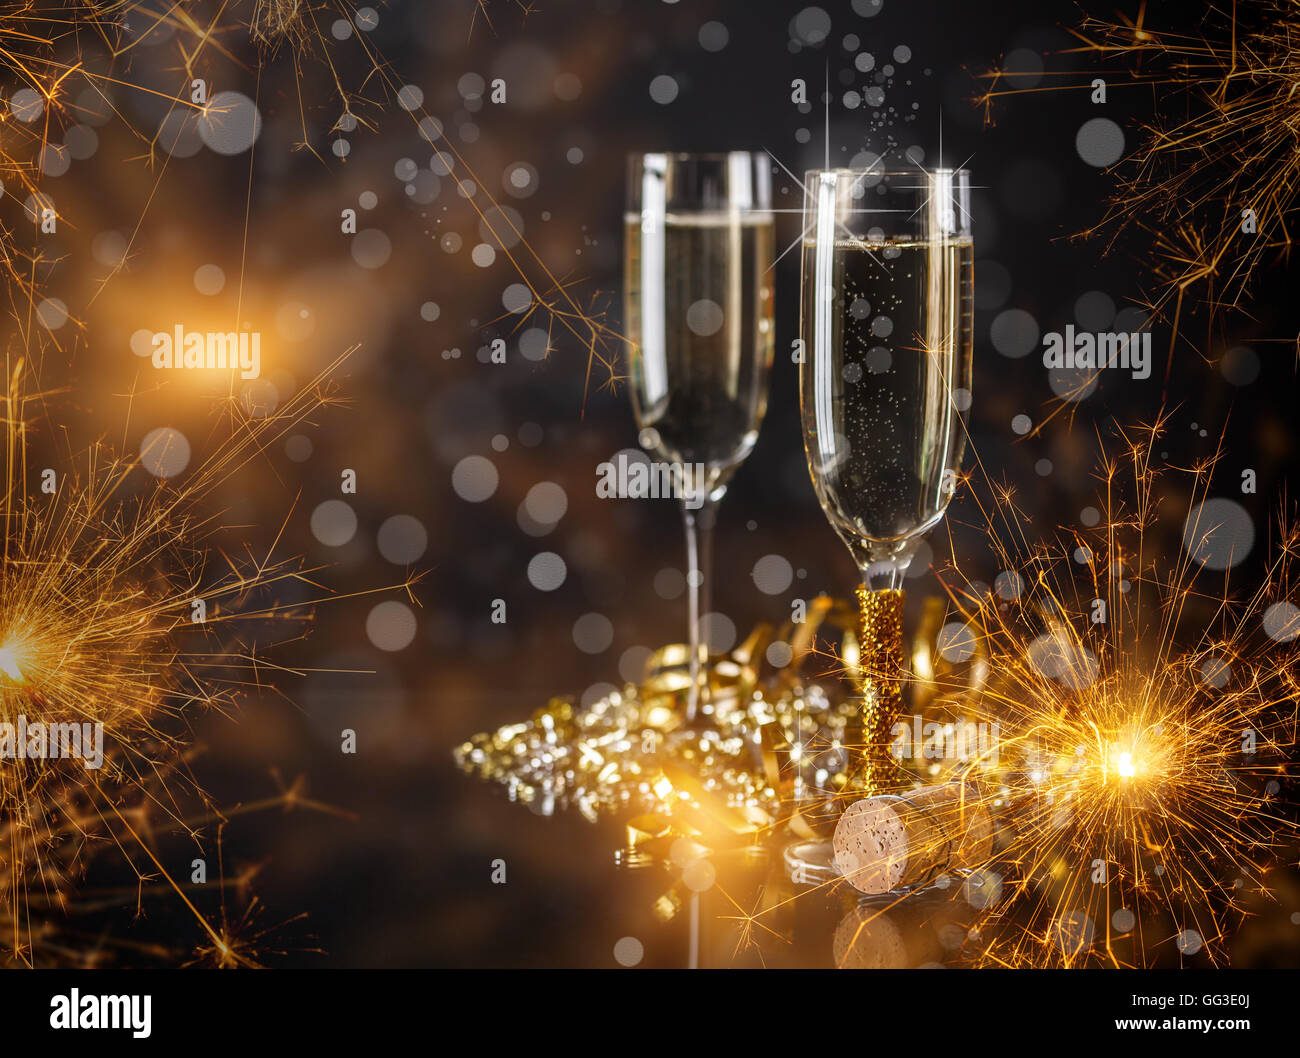 Champagne glasses ready to bring in the New Year Stock Photo